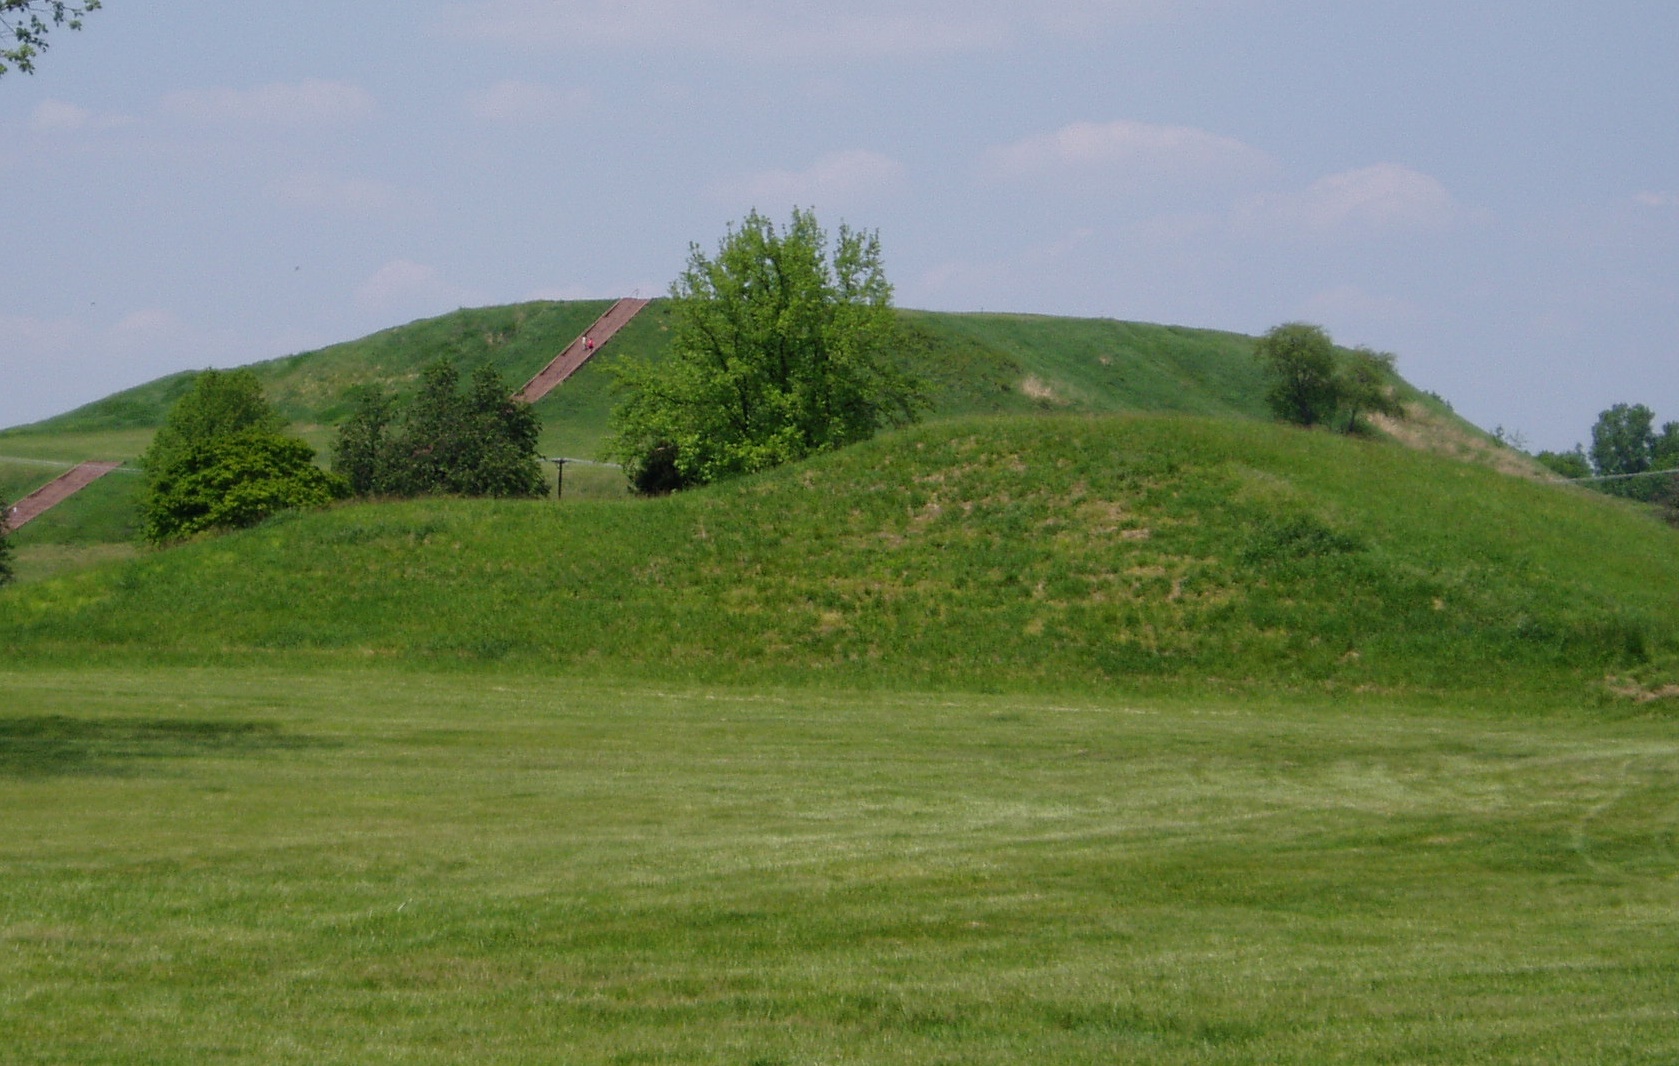 Cahokia Mounds State Park, site of the original Midwestern metropolis, within sight of St. Louis